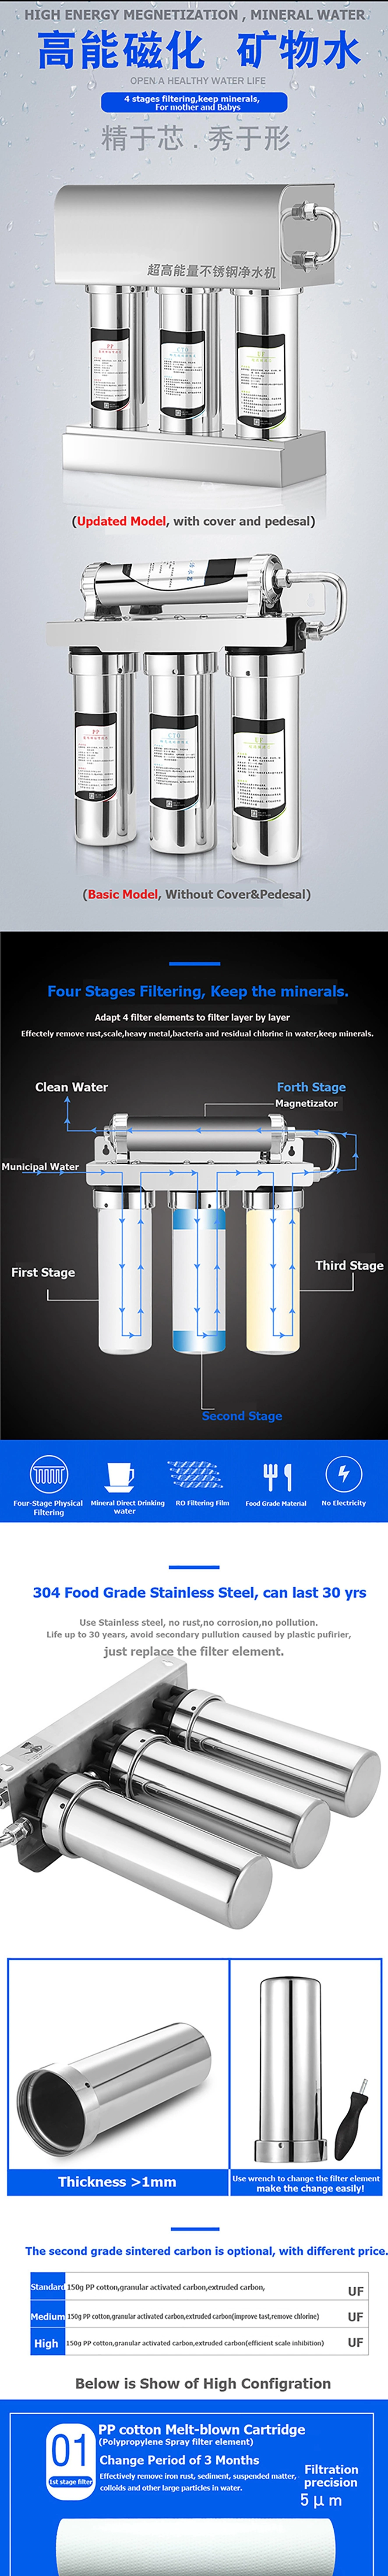 Whole House Stainless Steel Water Filter UF Membrane Water Purifier